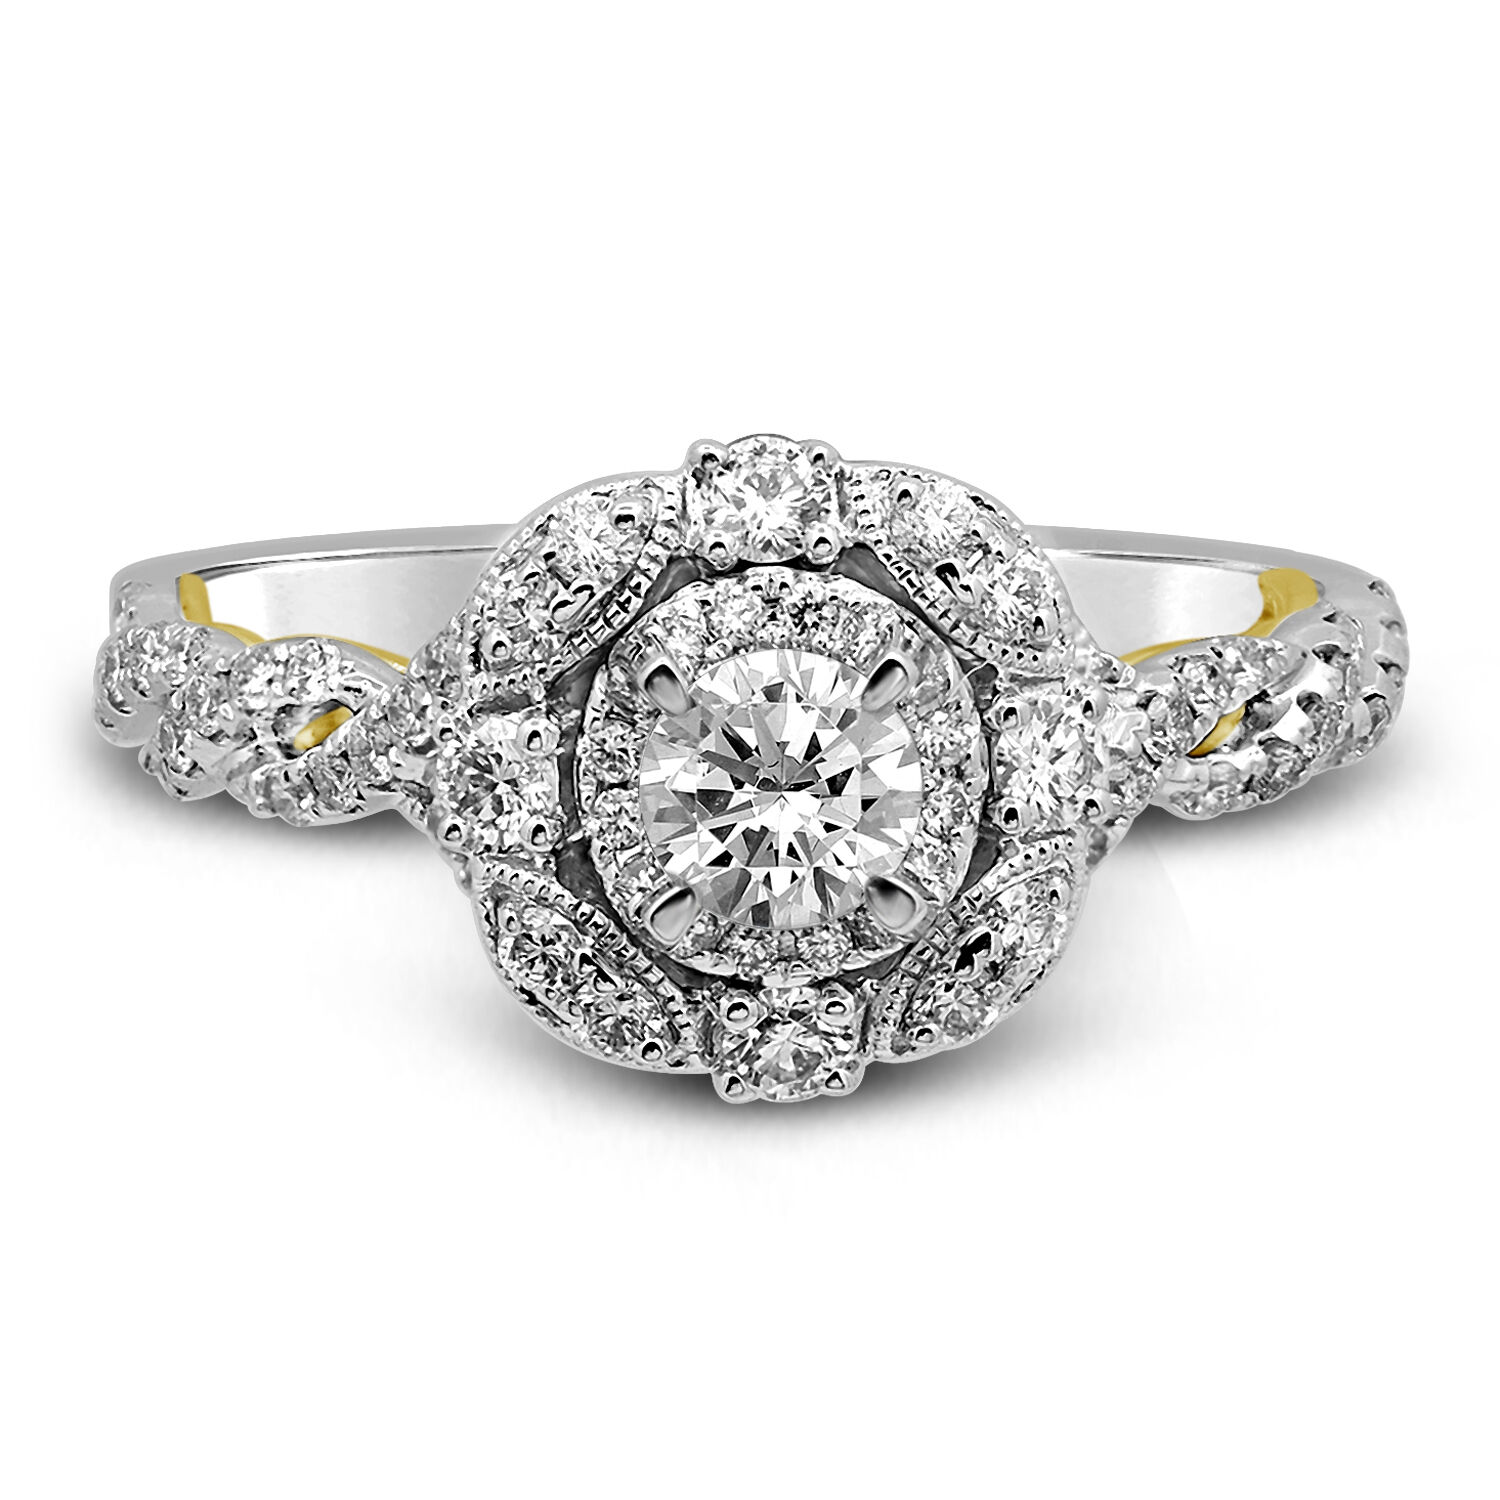 First Look: Zac Posen's New Engagement Rings for Blue Nile | BridalGuide